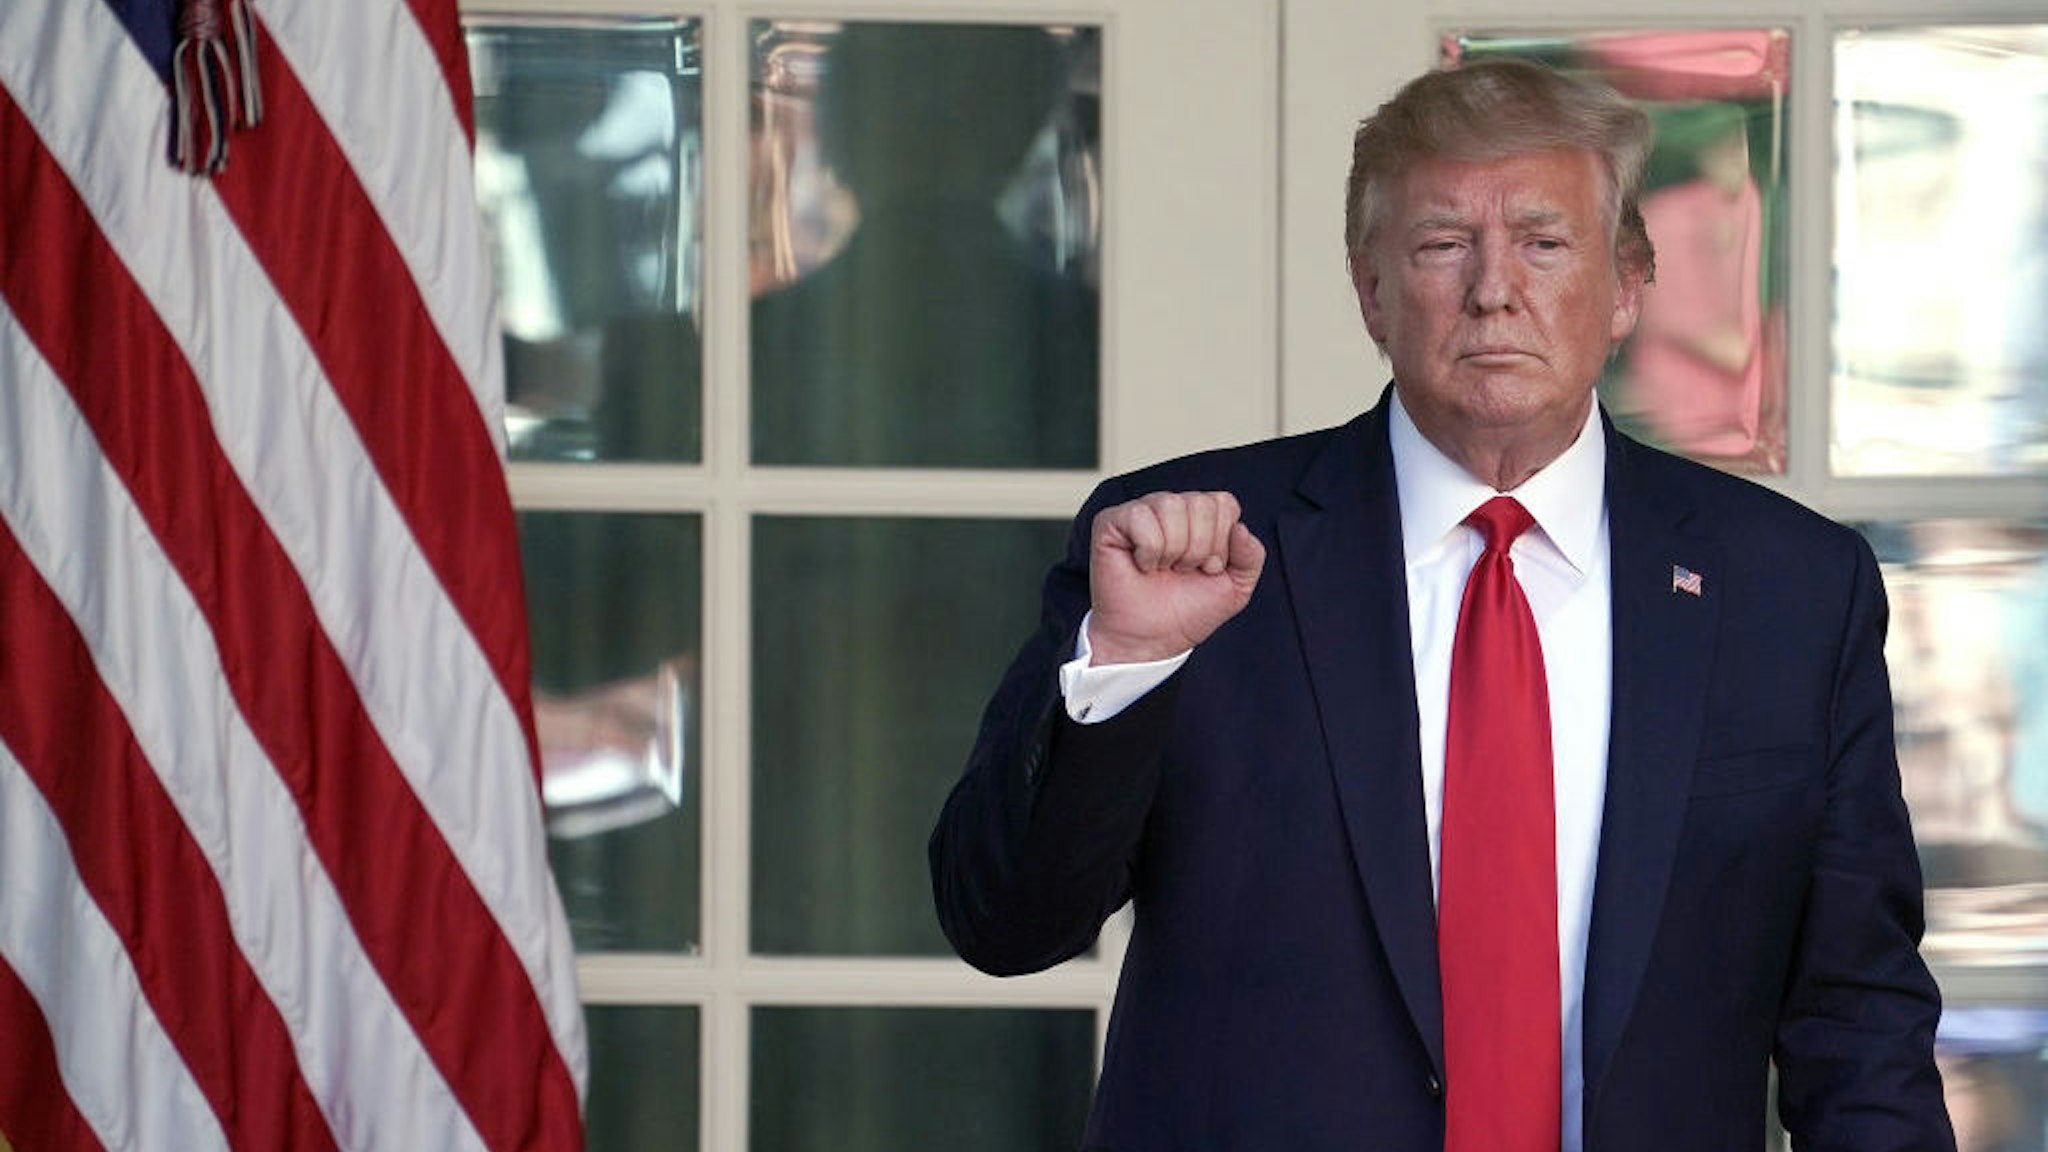 WASHINGTON, DC - AUGUST 29: U.S. President Donald Trump heads back to the Oval Office after attending an event establishing the U.S. Space Command, the sixth national armed service, in the Rose Garden at the White House August 29, 2019 in Washington, DC. Citing potential threats from China and Russia and the nation’s reliance on satellites for defense operations, Trump said the U.S. needs to launch a 'space force.' U.S. Air Force Gen. John Raymond will serve as the first head of Space Command, which will have 87 active units handling operations such as missile warning, satellite surveillance, space control and space support. (Photo by Chip Somodevilla/Getty Images)